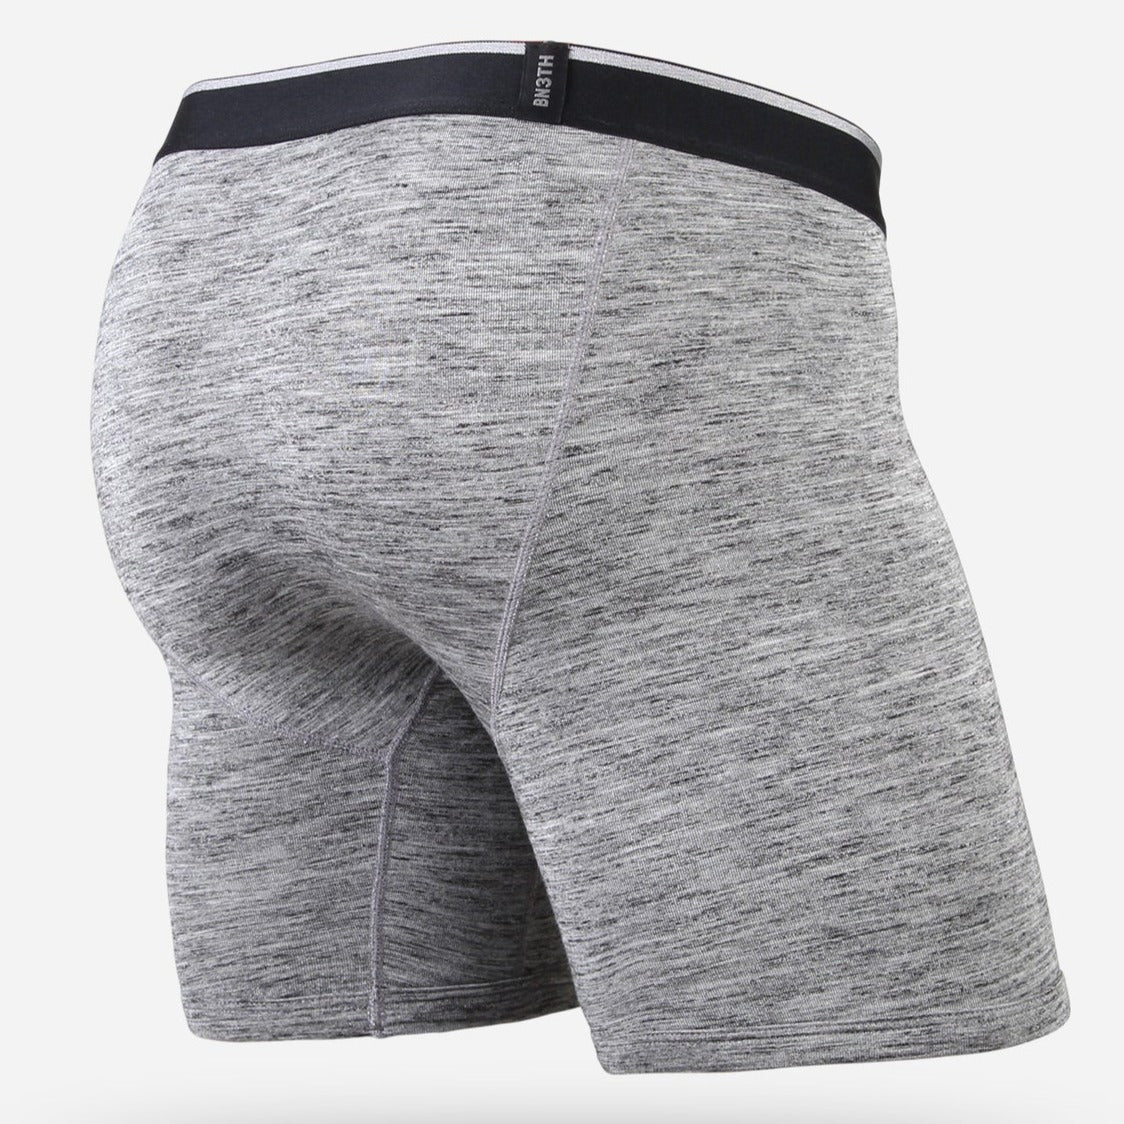 BN3TH - CLASSIC BOXER BRIEF SOLID IN CHARCOAL HEATHER